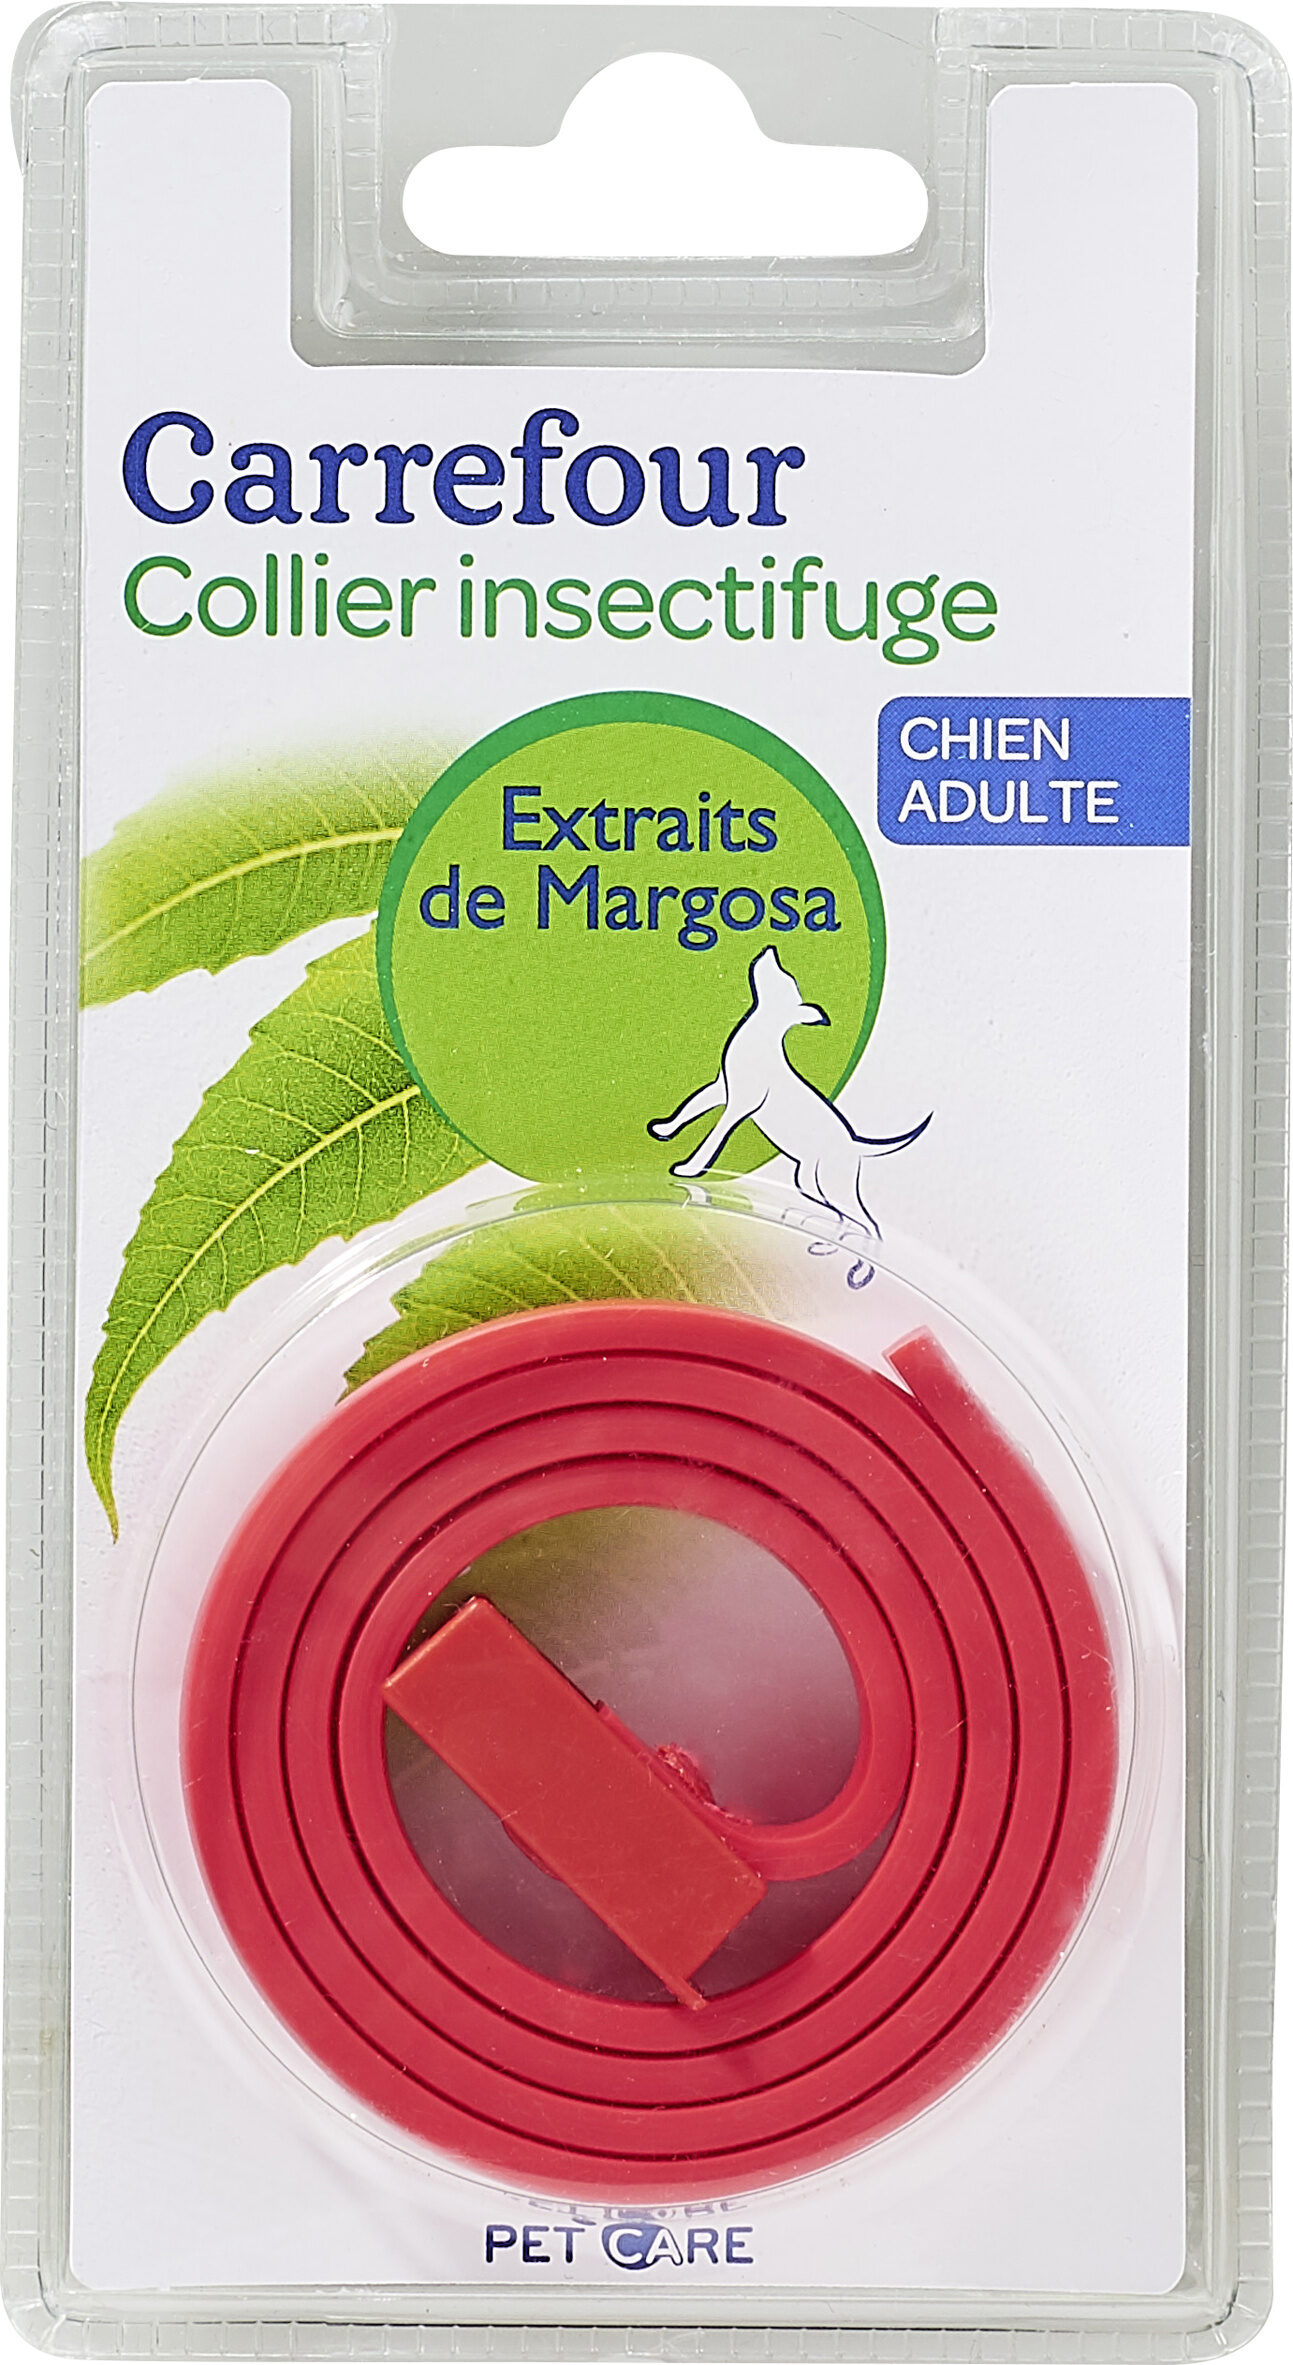 Collier insectifuge Chien adulte - Product - fr